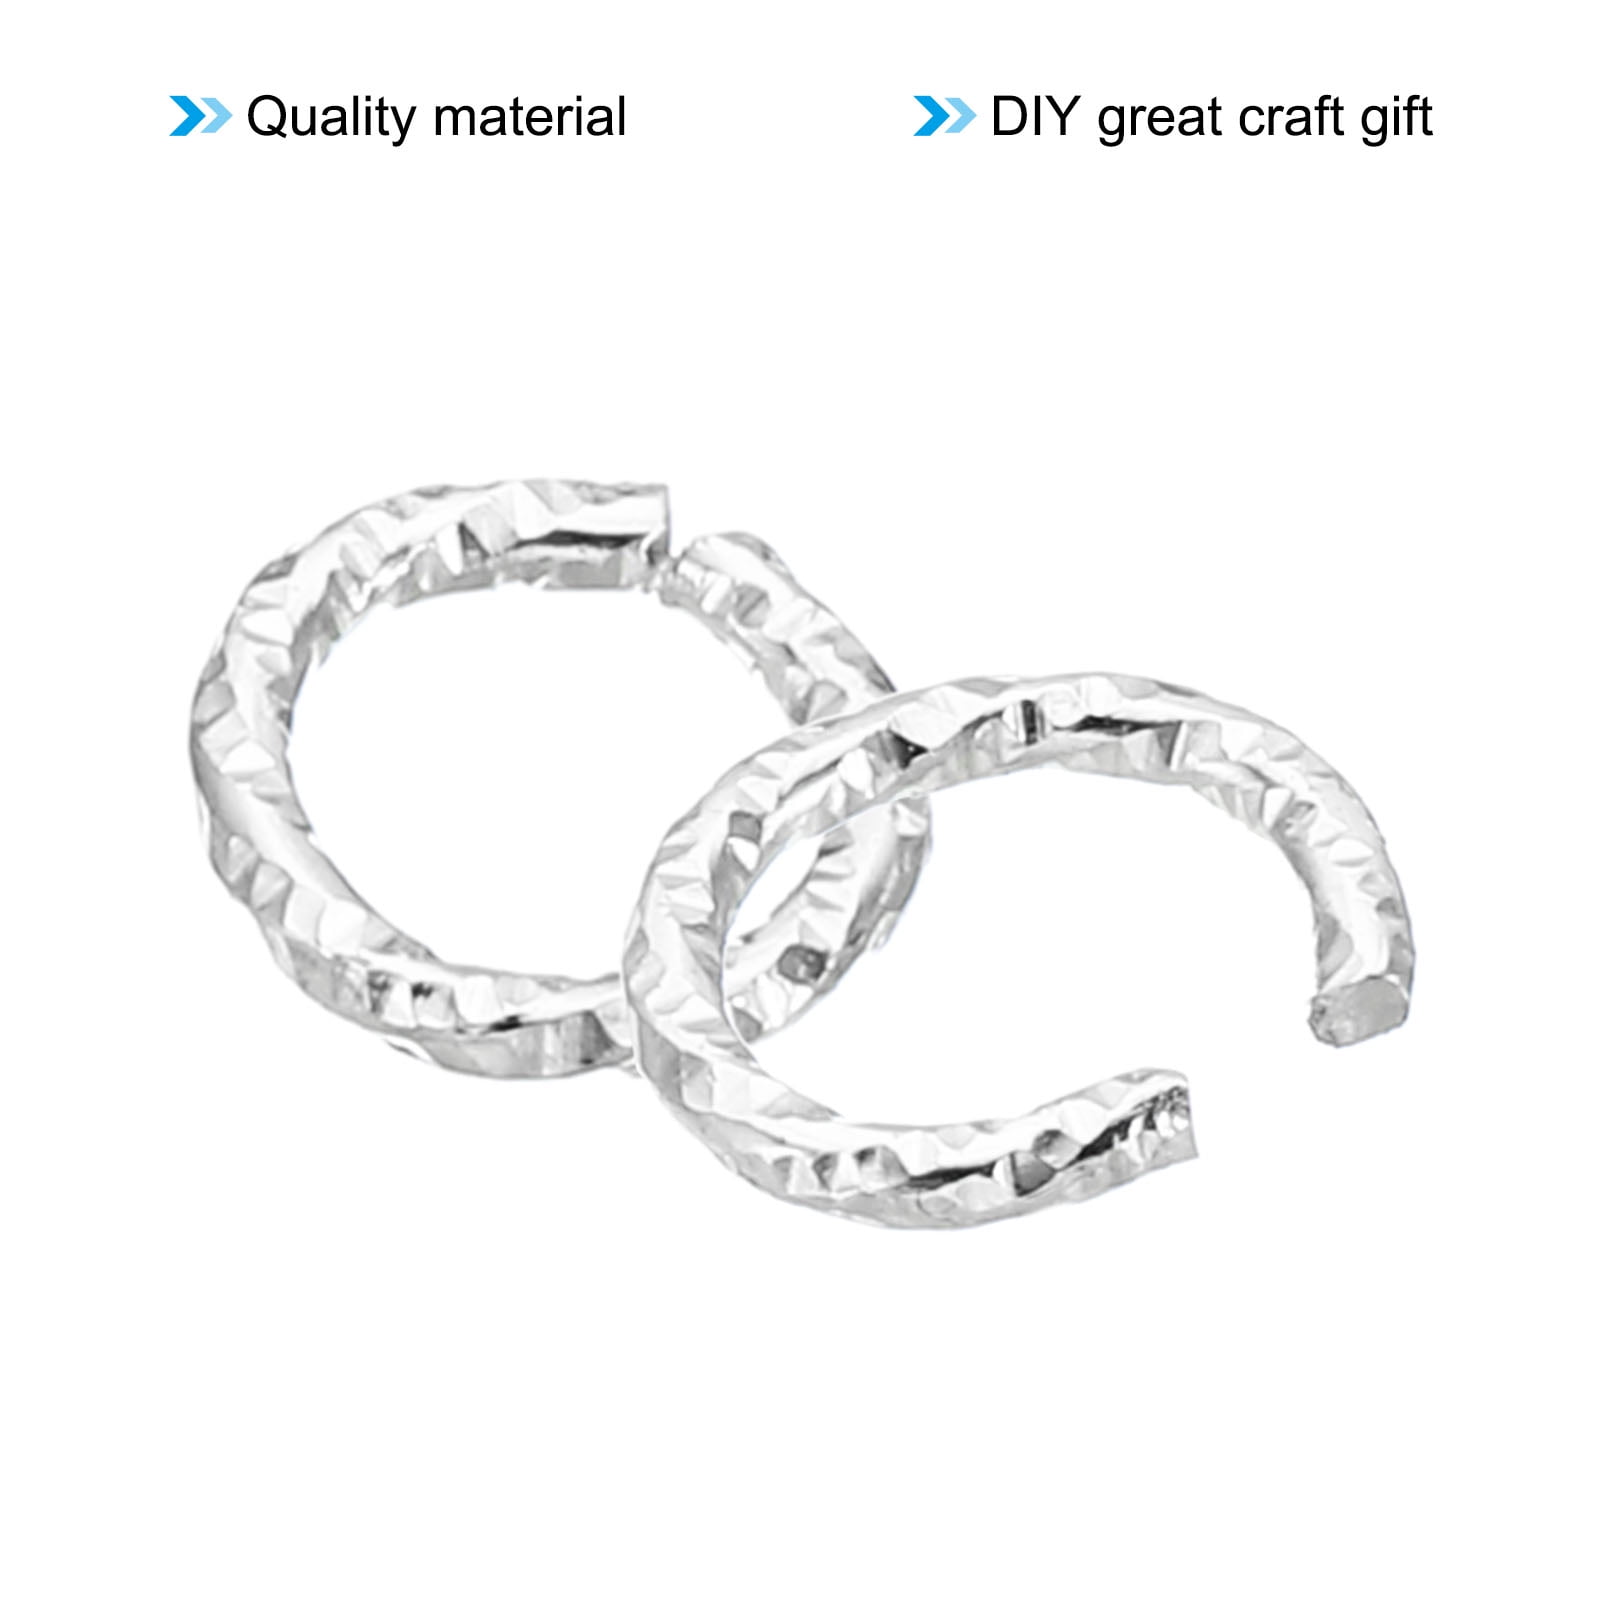 Uxcell 1.5 x 15mm Wine Glass Charm Ring Metal Earring Beading Hoop Twisted Open Jump Rings, Silver 100 Pack, Women's, Size: 1.5 mm x 15 mm